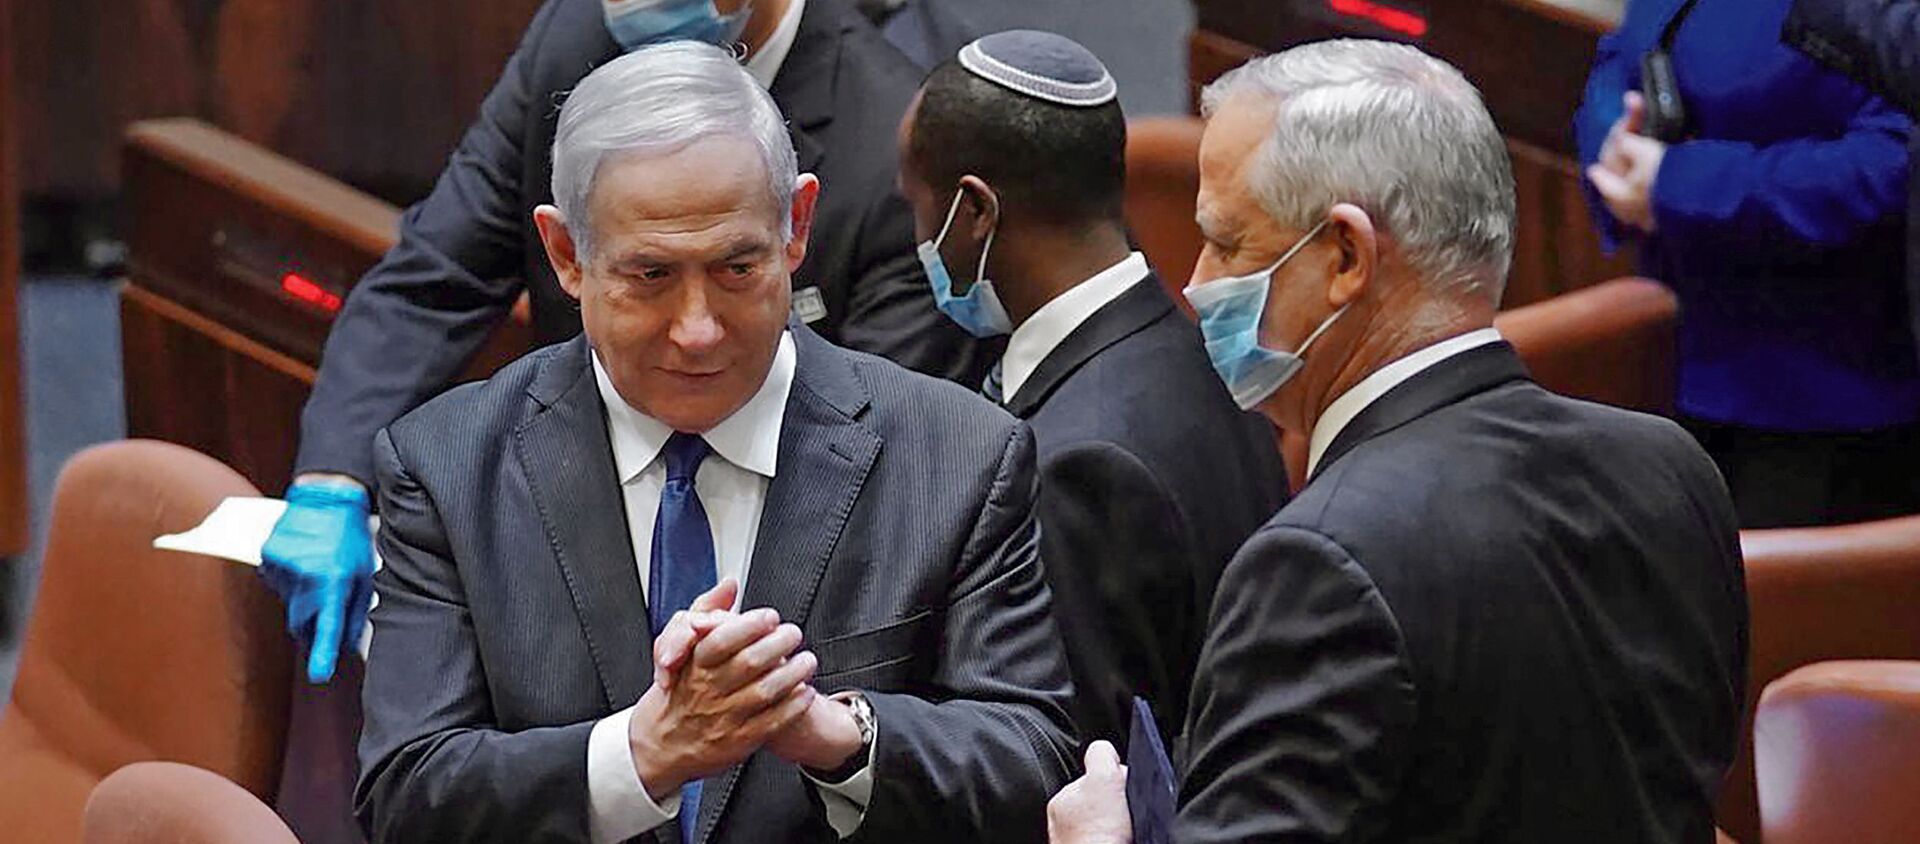 A handout picture released by the Israeli Knesset (parliament) spokesperson's office on May 17, 2020, shows Israeli Prime Minister Benjamin Netanyahu (L) and alternate PM Benny Gantz, during the swearing-in ceremony of the new government in Jerusalem - Sputnik International, 1920, 22.12.2020